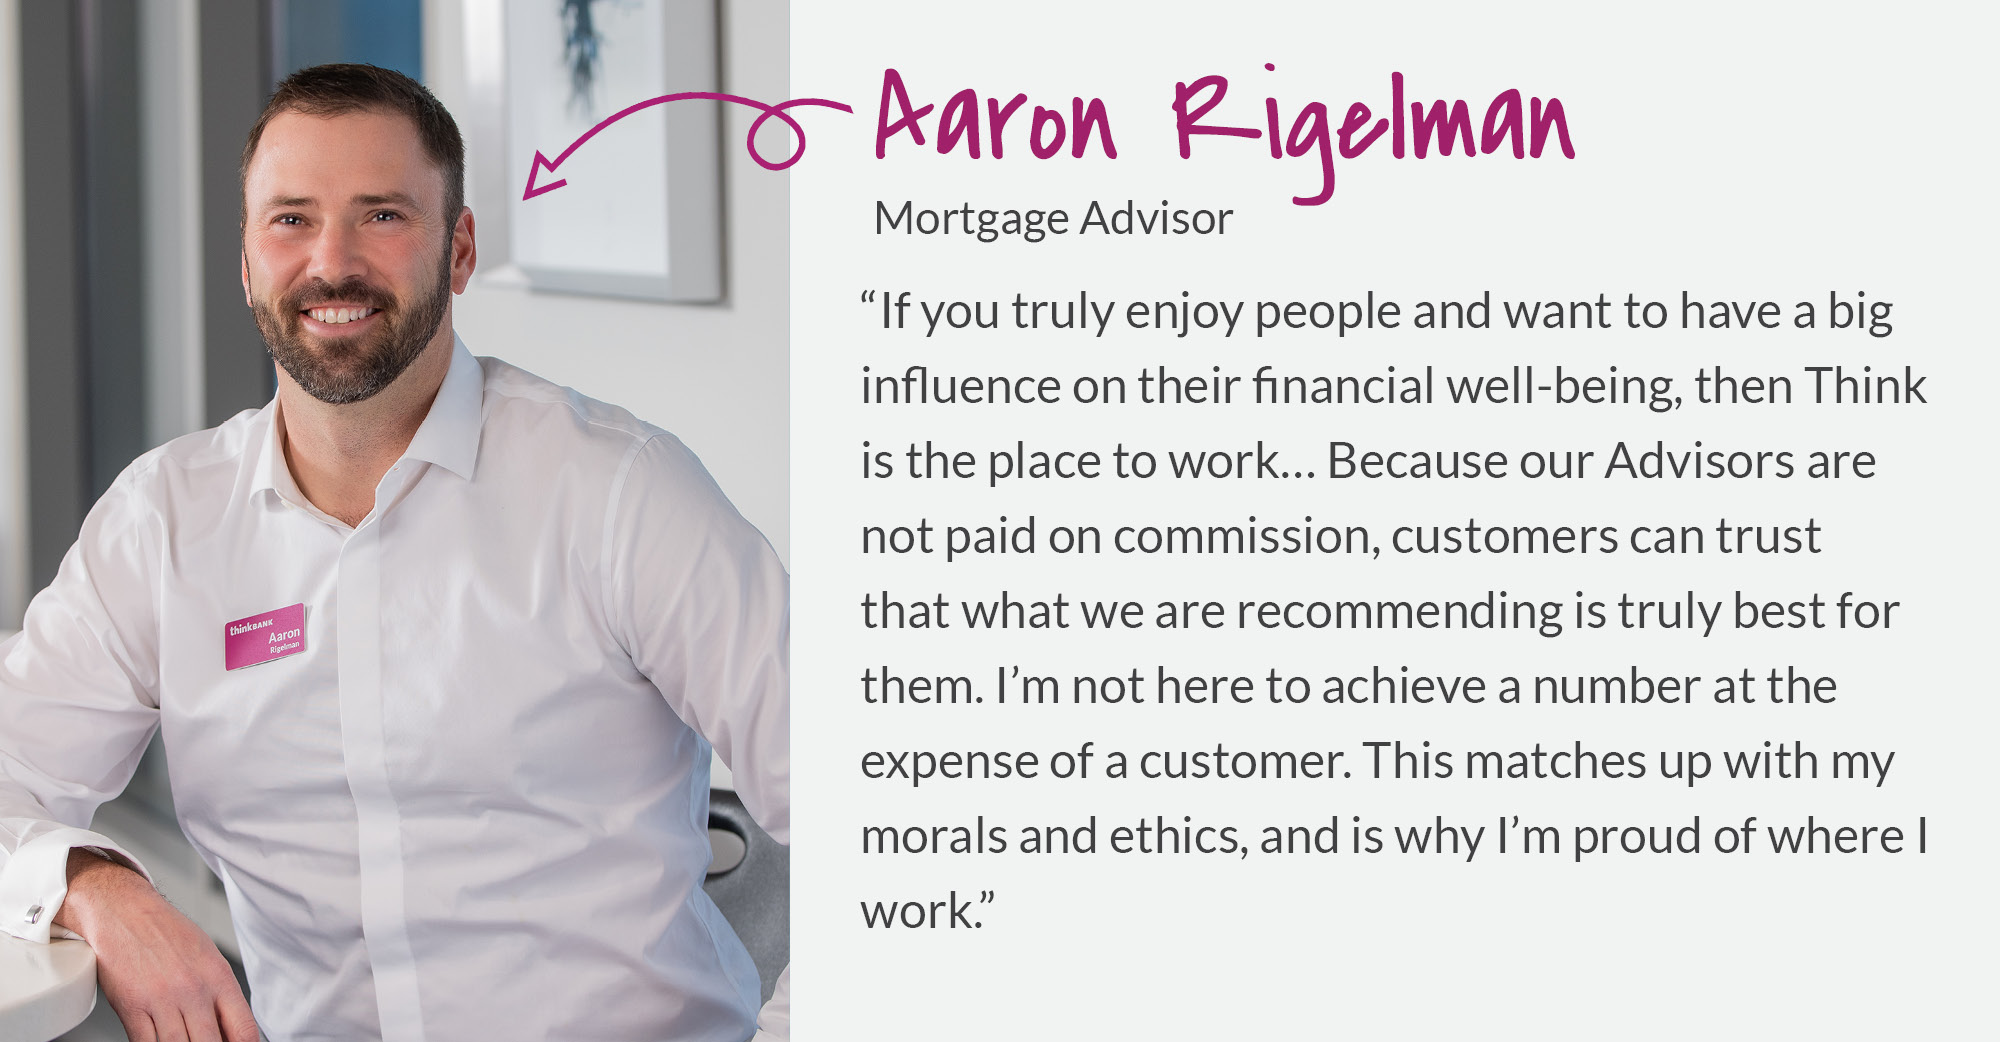 Aaron Rigelman - If you truly enjoy people and want to have a big influence on their financial well-being, then Think is the place to work. 